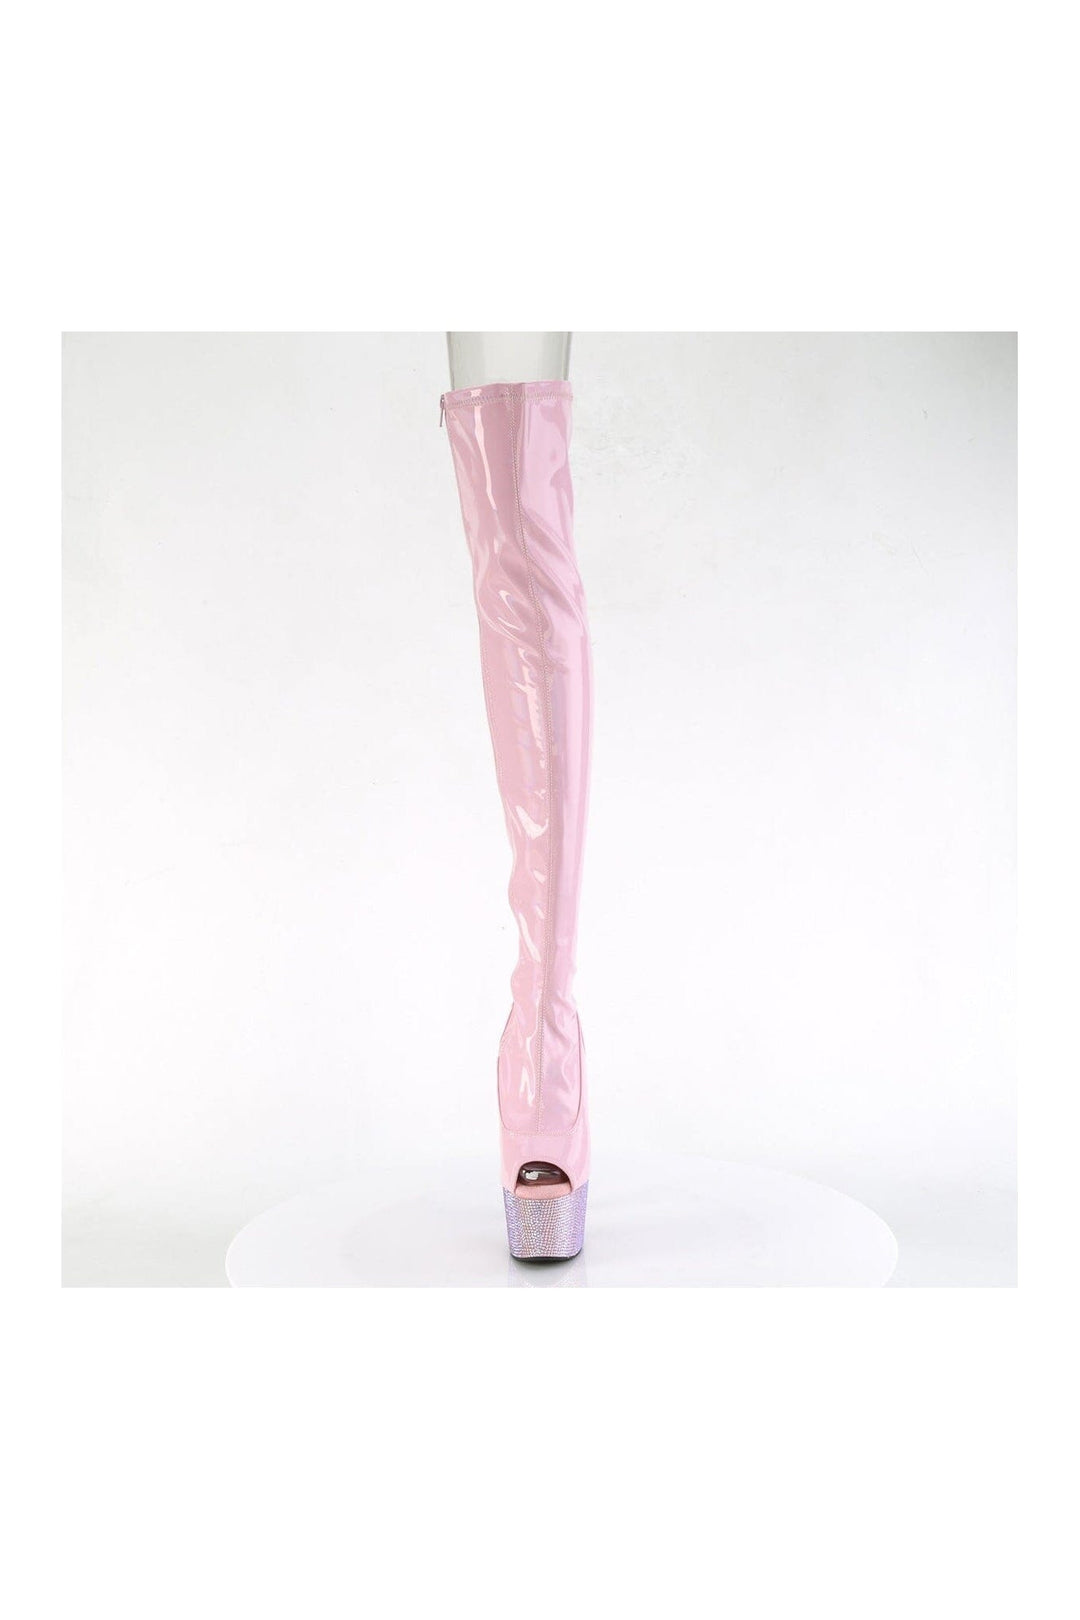 BEJEWELED-3011-7 Pink Patent Thigh Boot-Thigh Boots-Pleaser-SEXYSHOES.COM